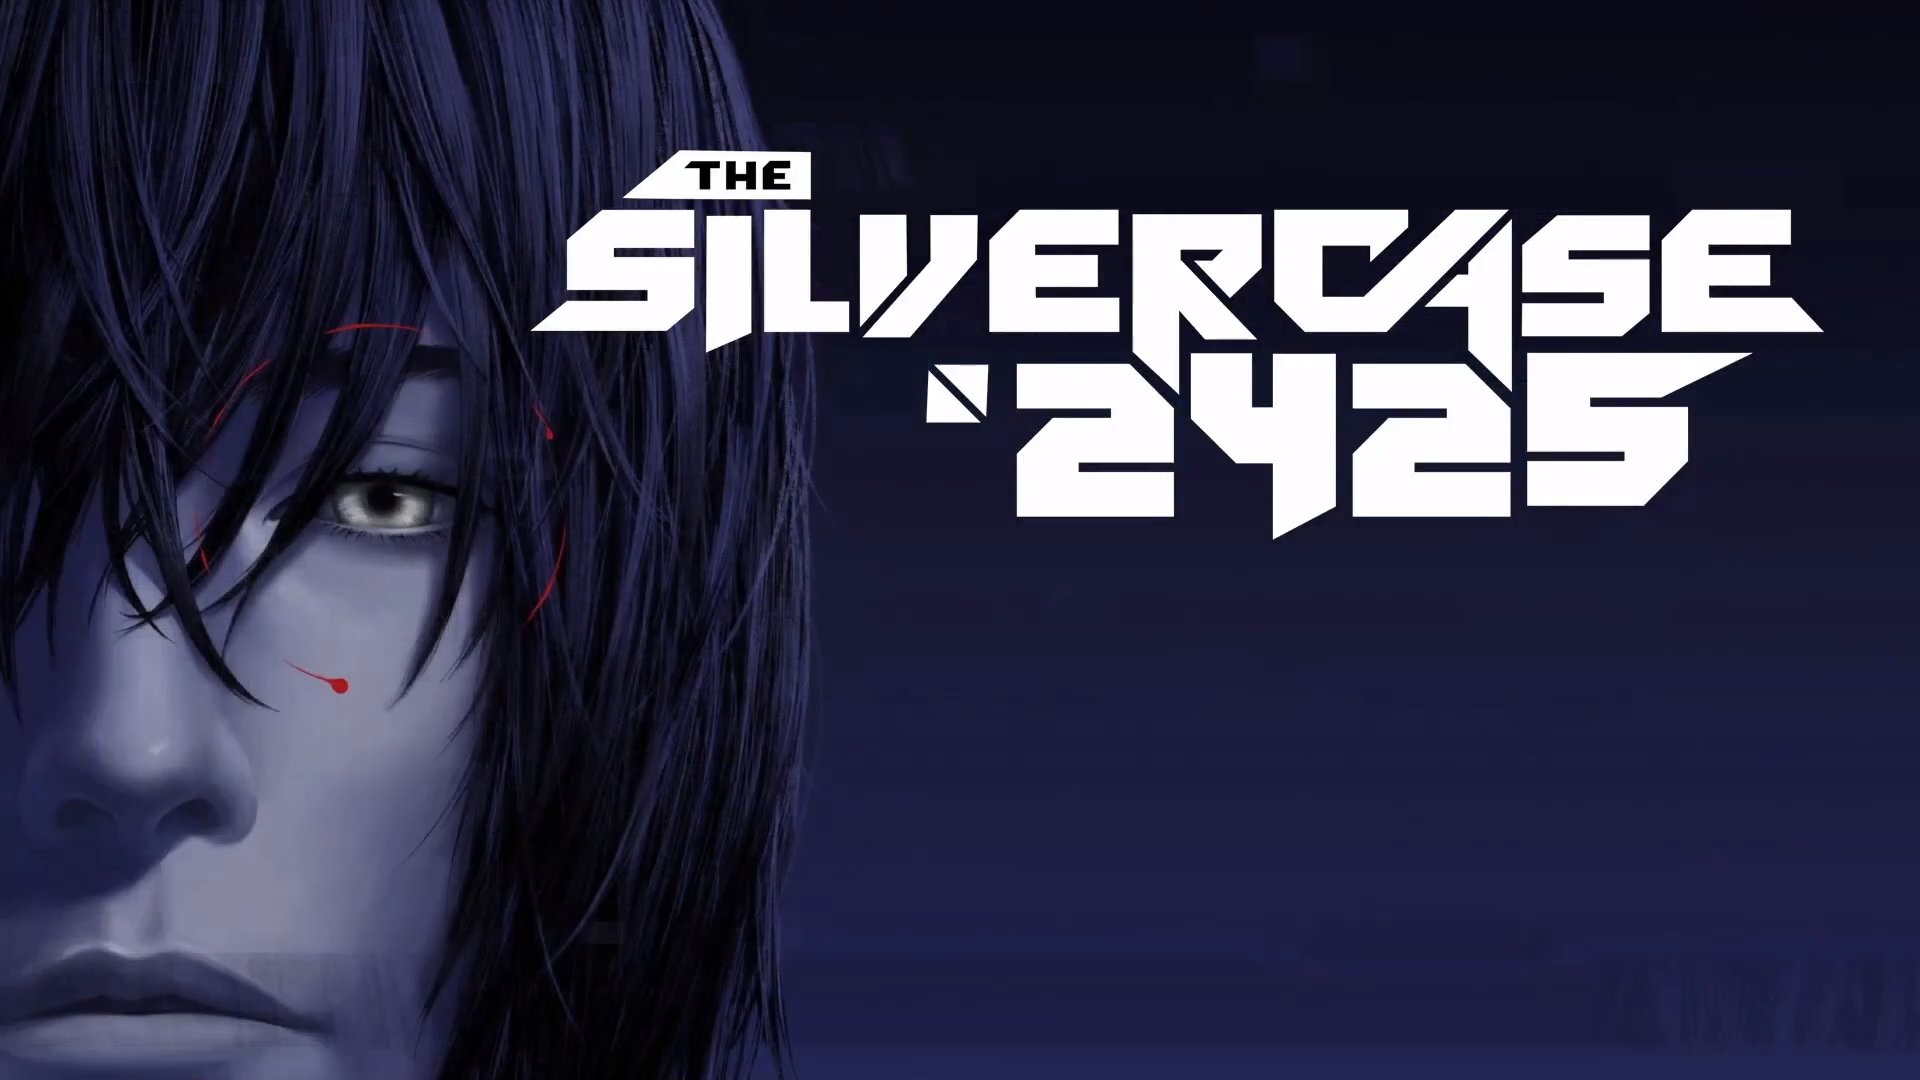 The Silver Case 2425 for Switch Heads West on July 6